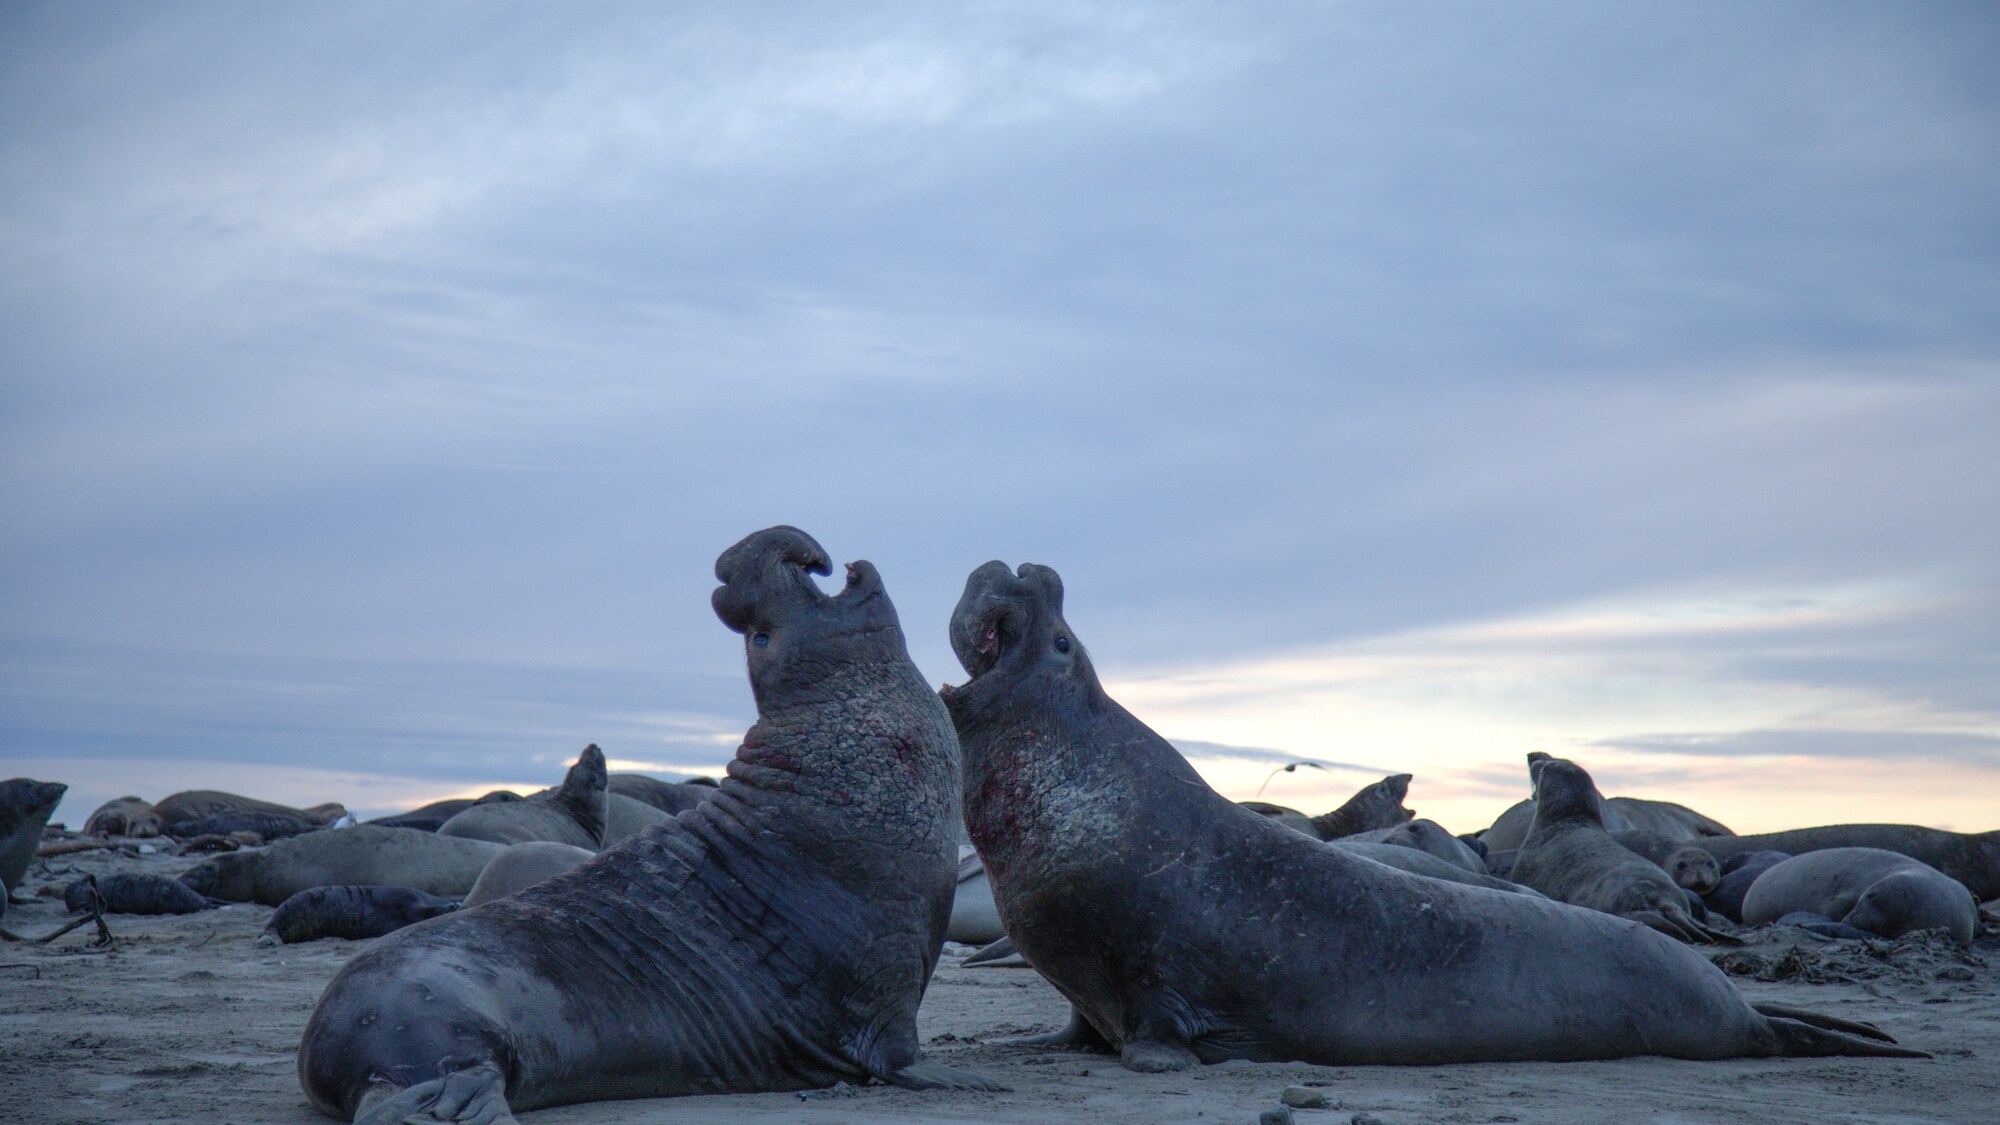 Bull elephant seals fighting on the beach at sunset.  (National Geographic for Disney+/Joel Wilson)